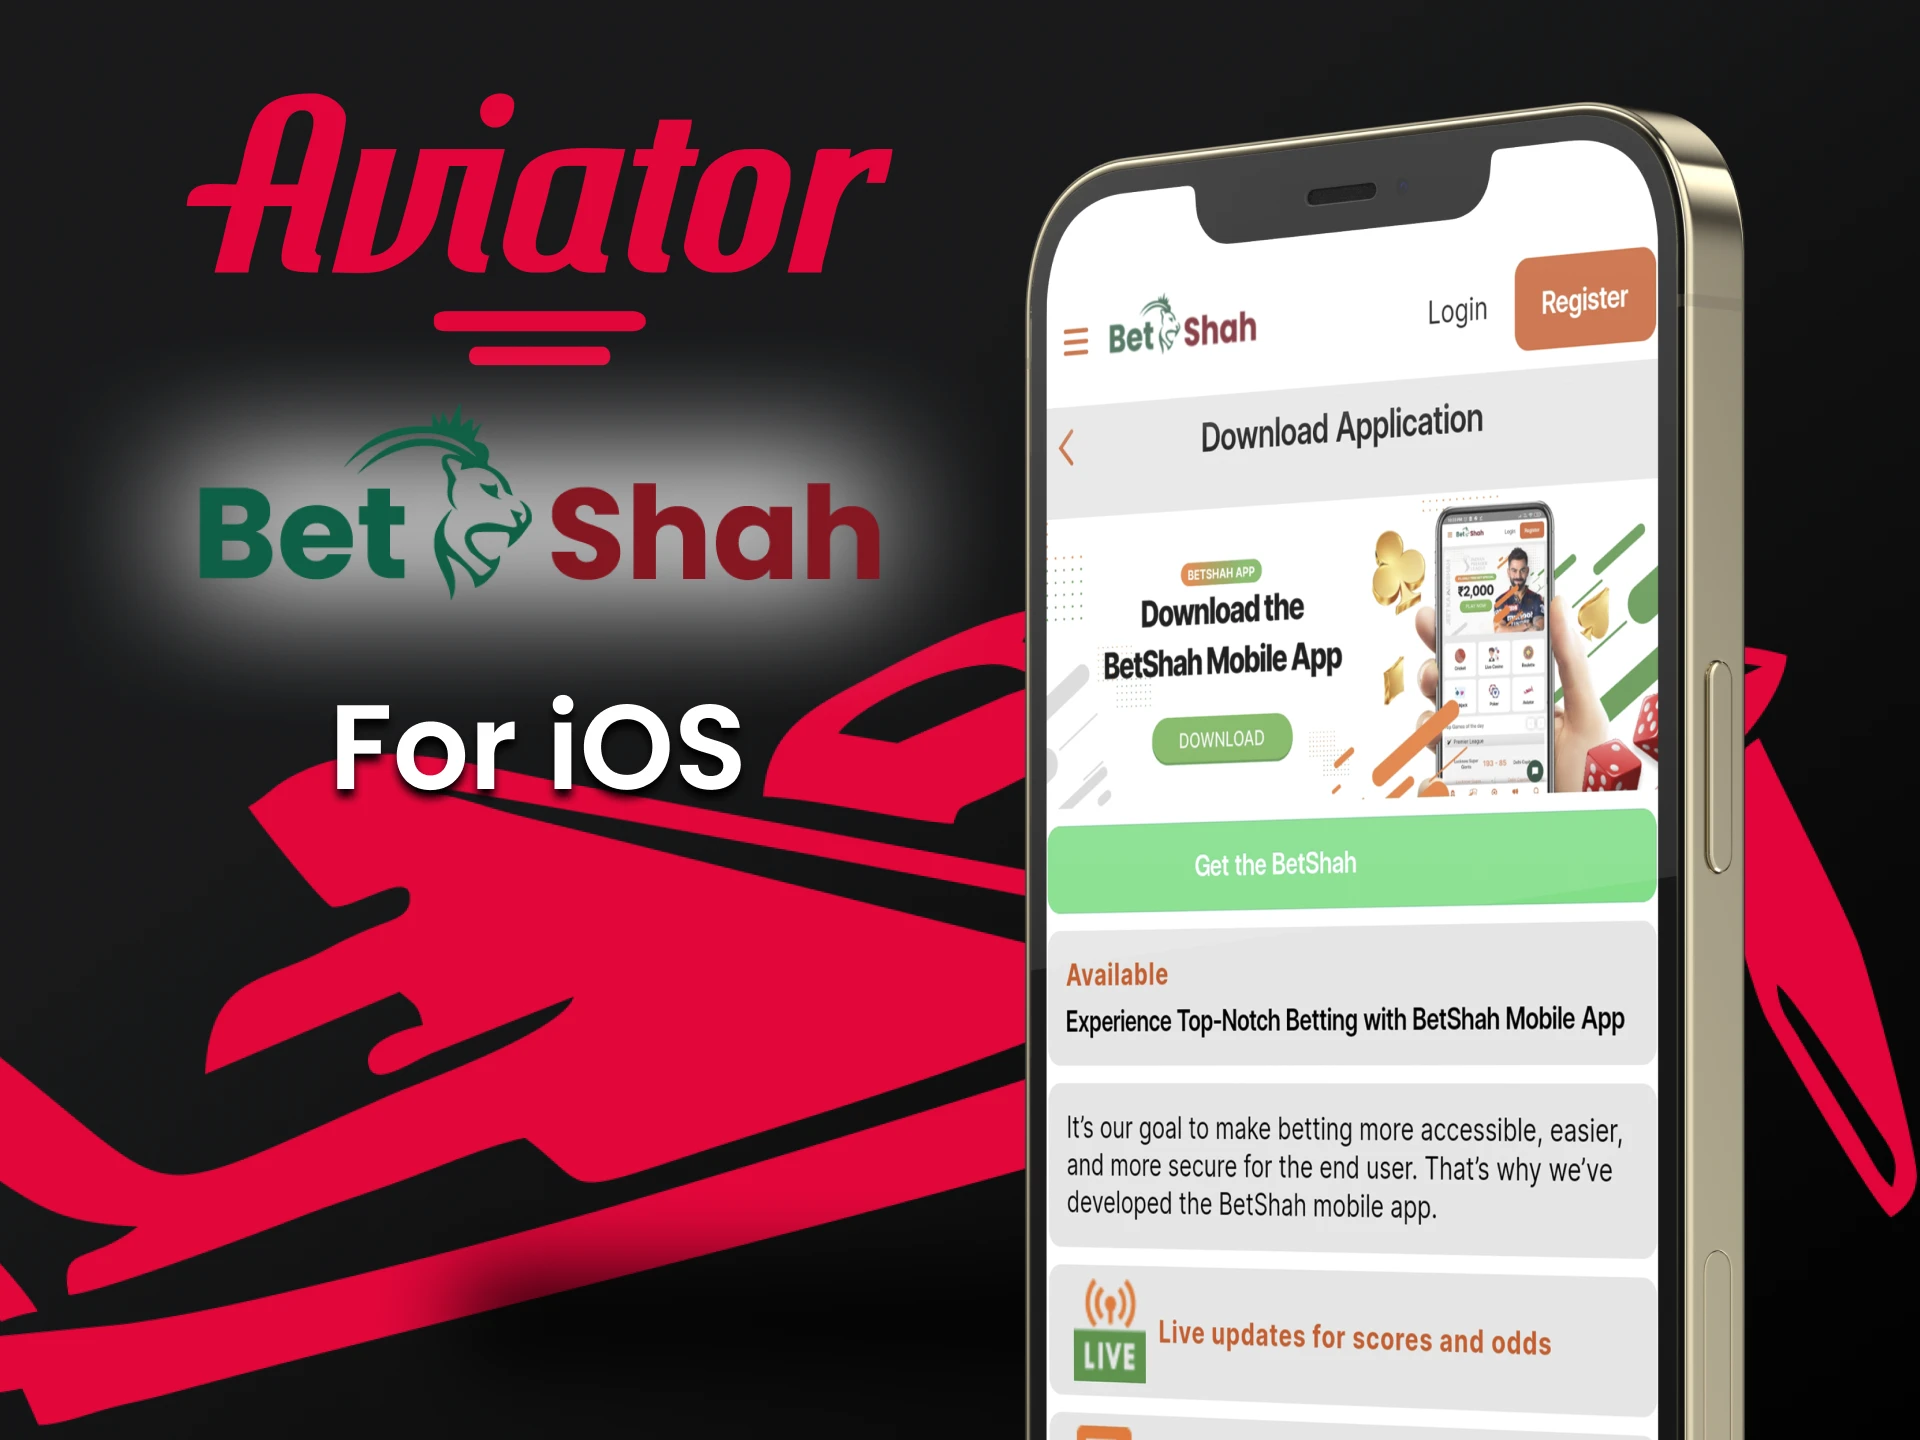 Install the BetShah app on iOS to play Aviator.